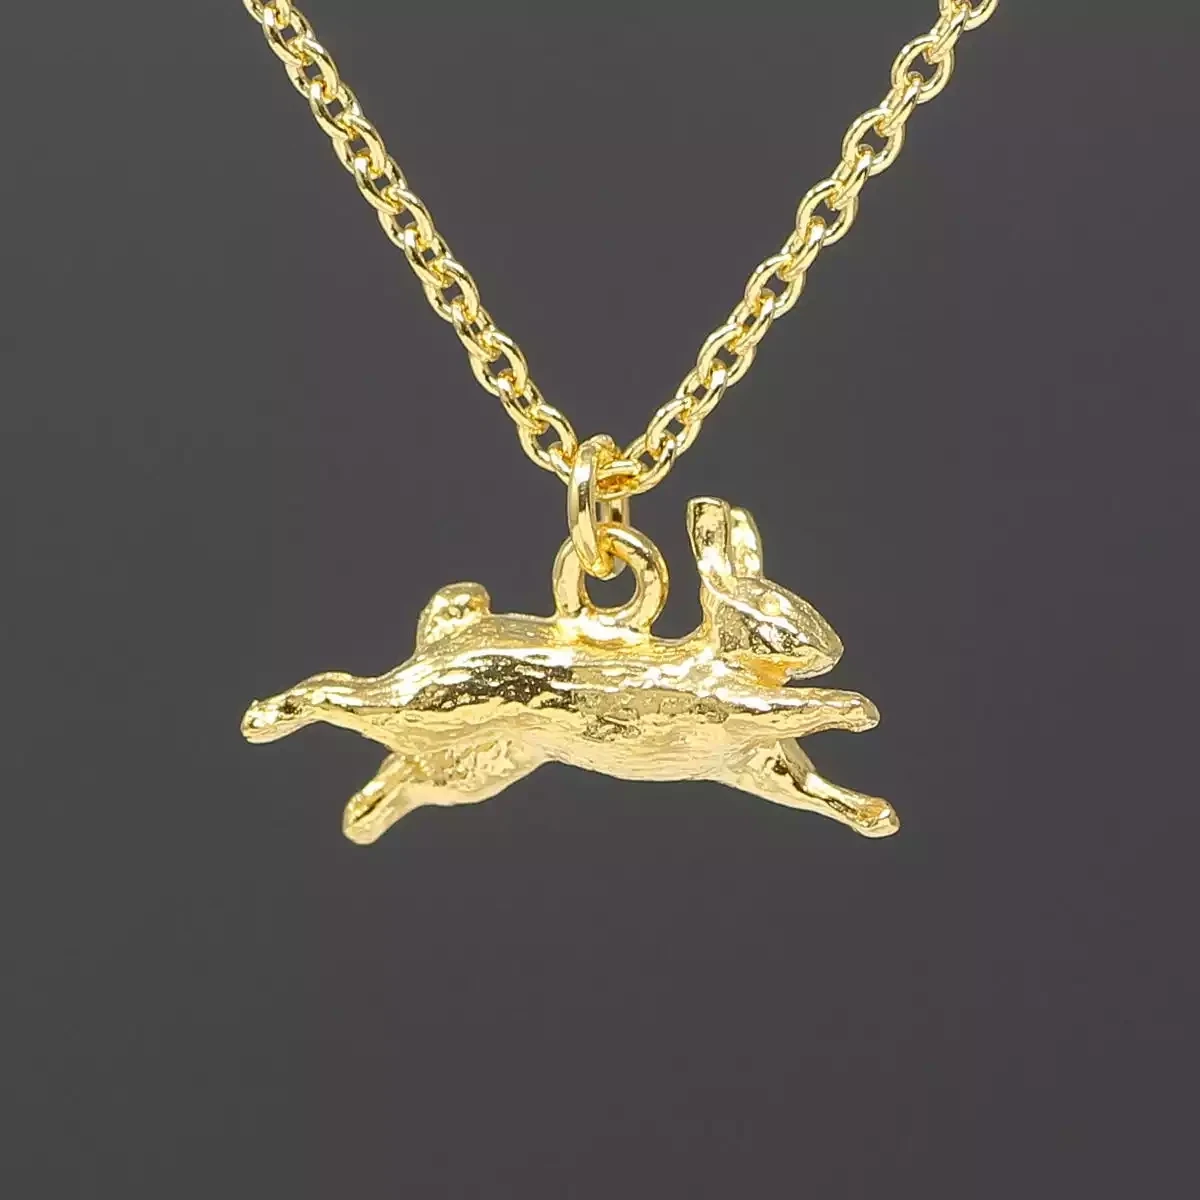 Leaping Rabbit Necklace - Gold Plated by Alex Monroe